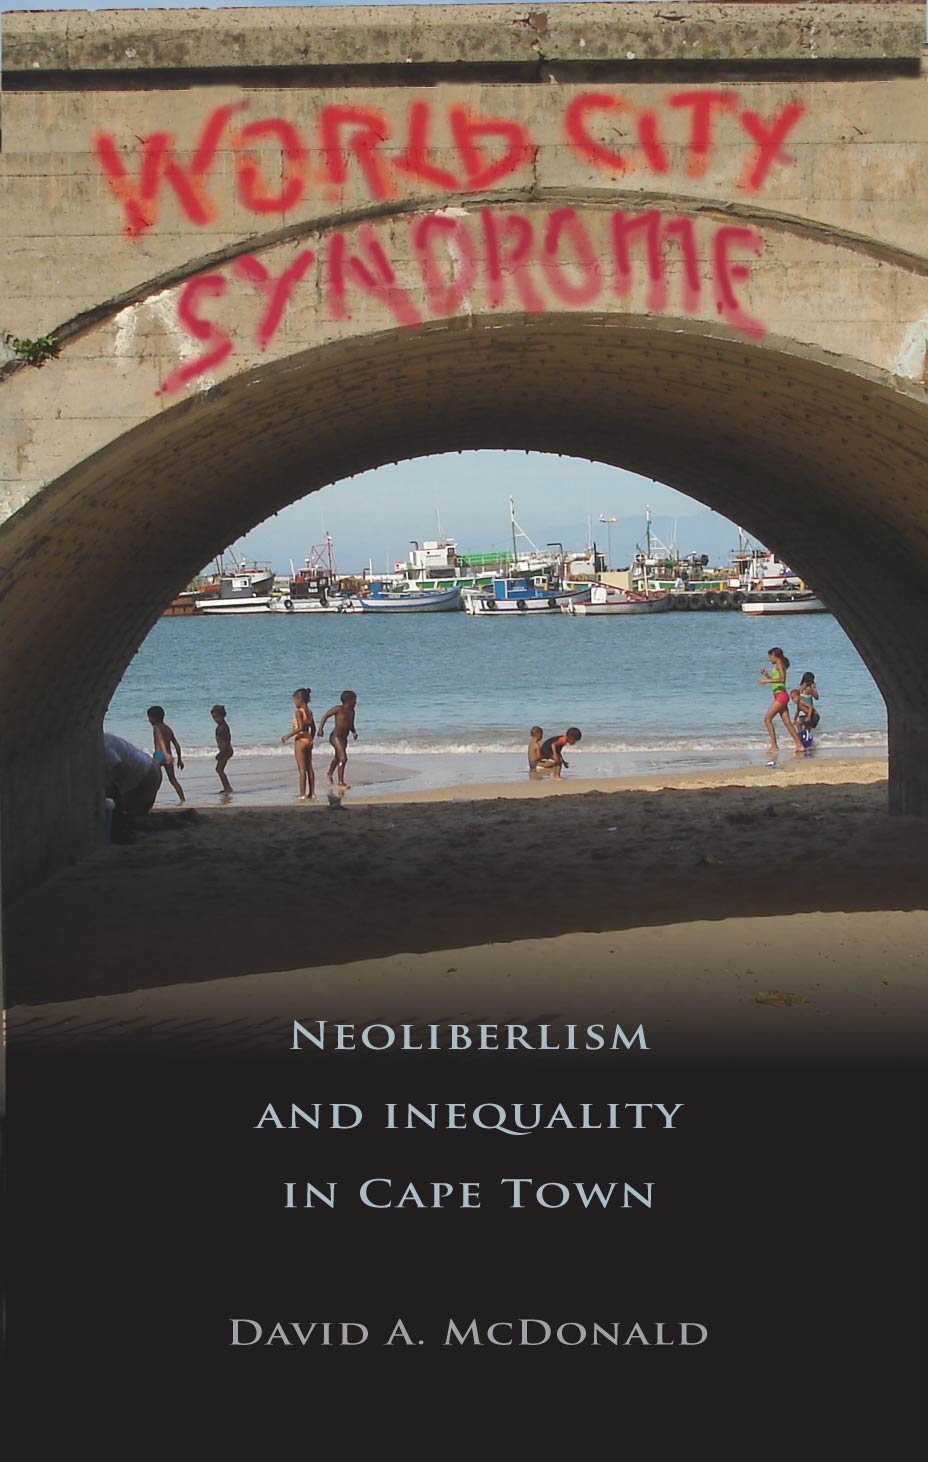 World City Syndrome: Neoliberalism and Inequality in Cape Town image